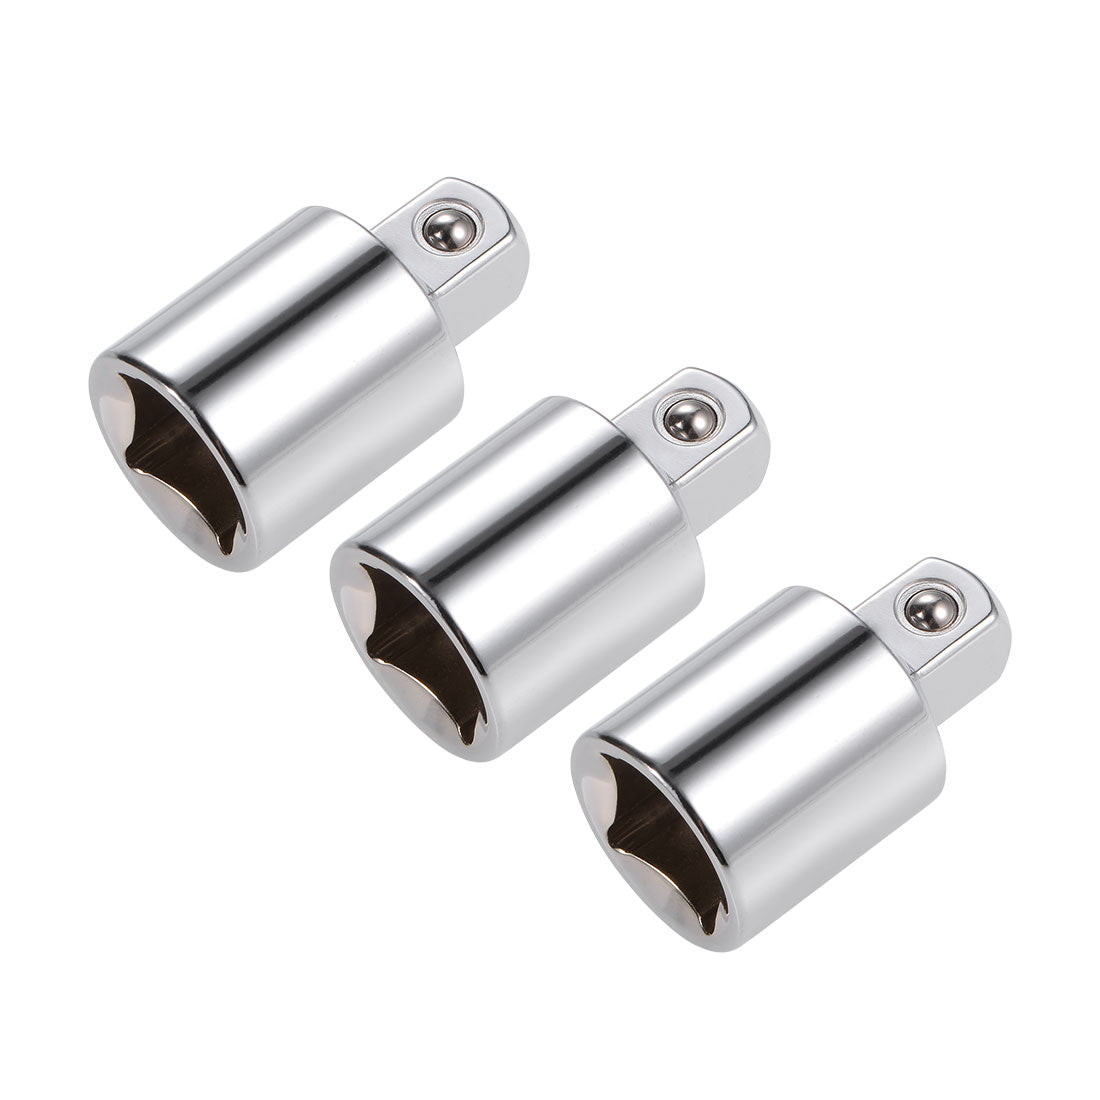 uxcell Uxcell 3 Pcs 1/2" Drive F x 3/8" M Socket Reducer for Ratchet Wrenches, Female to Male